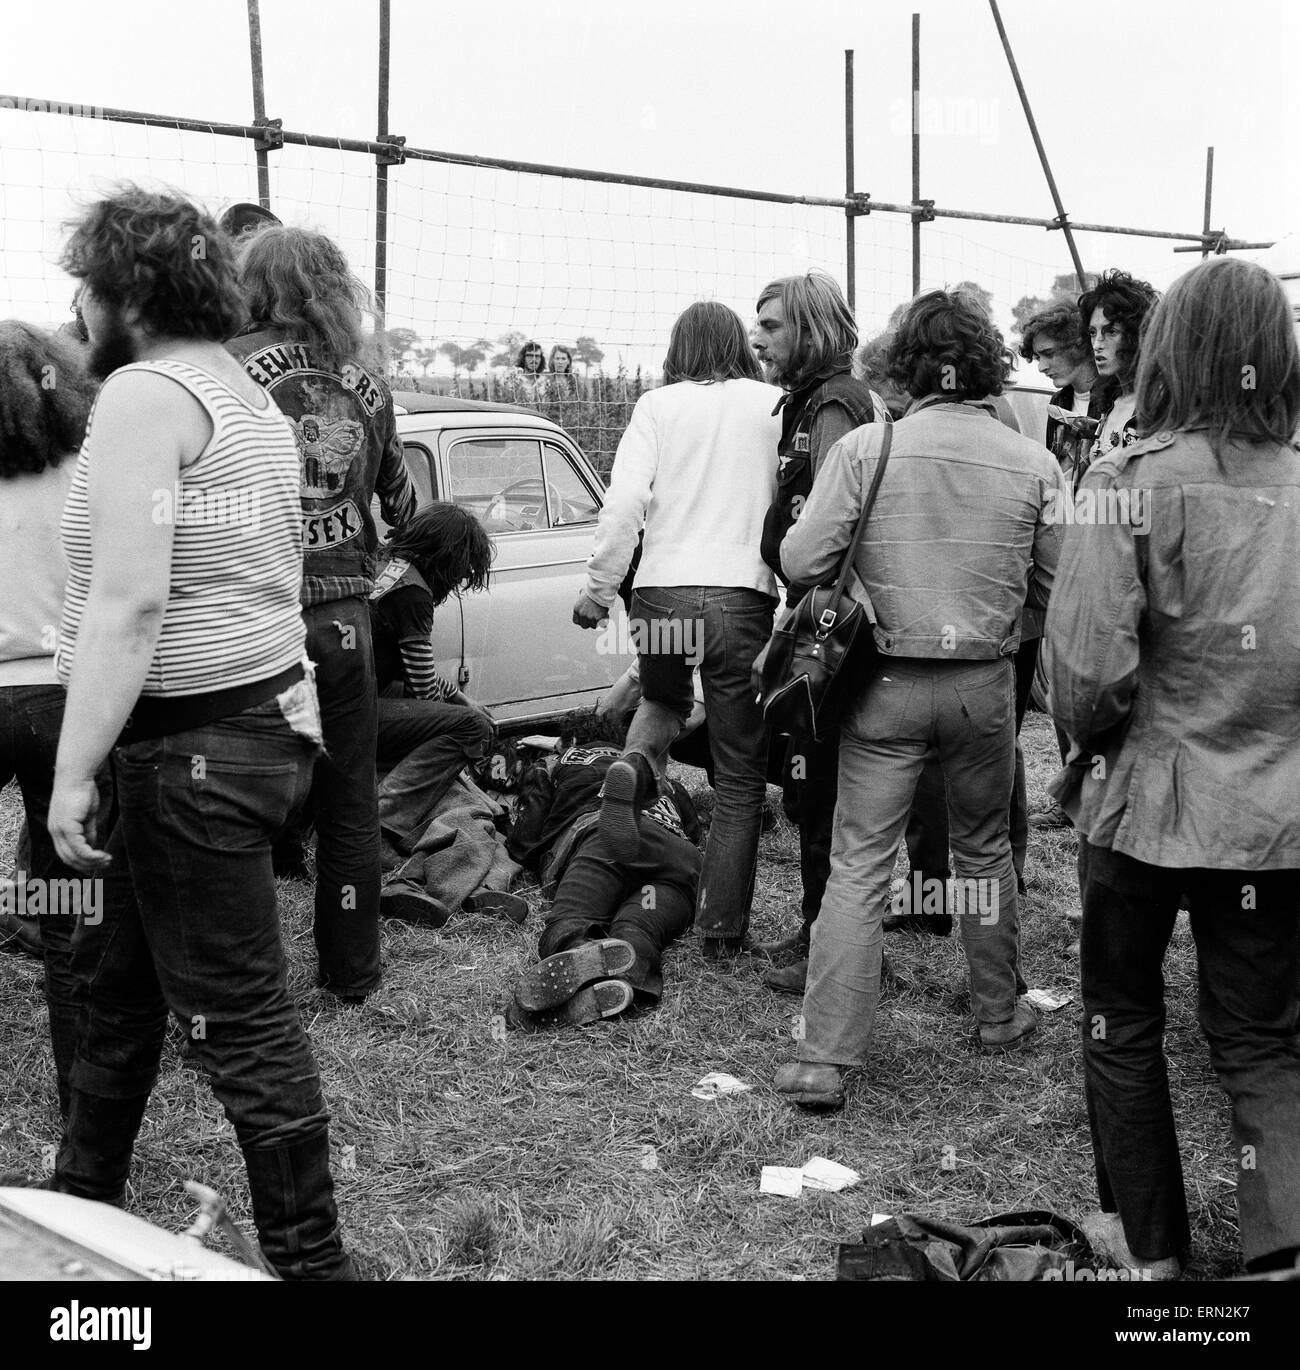 Scene at POP Festival, Weeley, Essex, following a battle between security men and Hells Angels, a young injured Hells Angel lays on the ground, 28th August 1971. Stock Photo